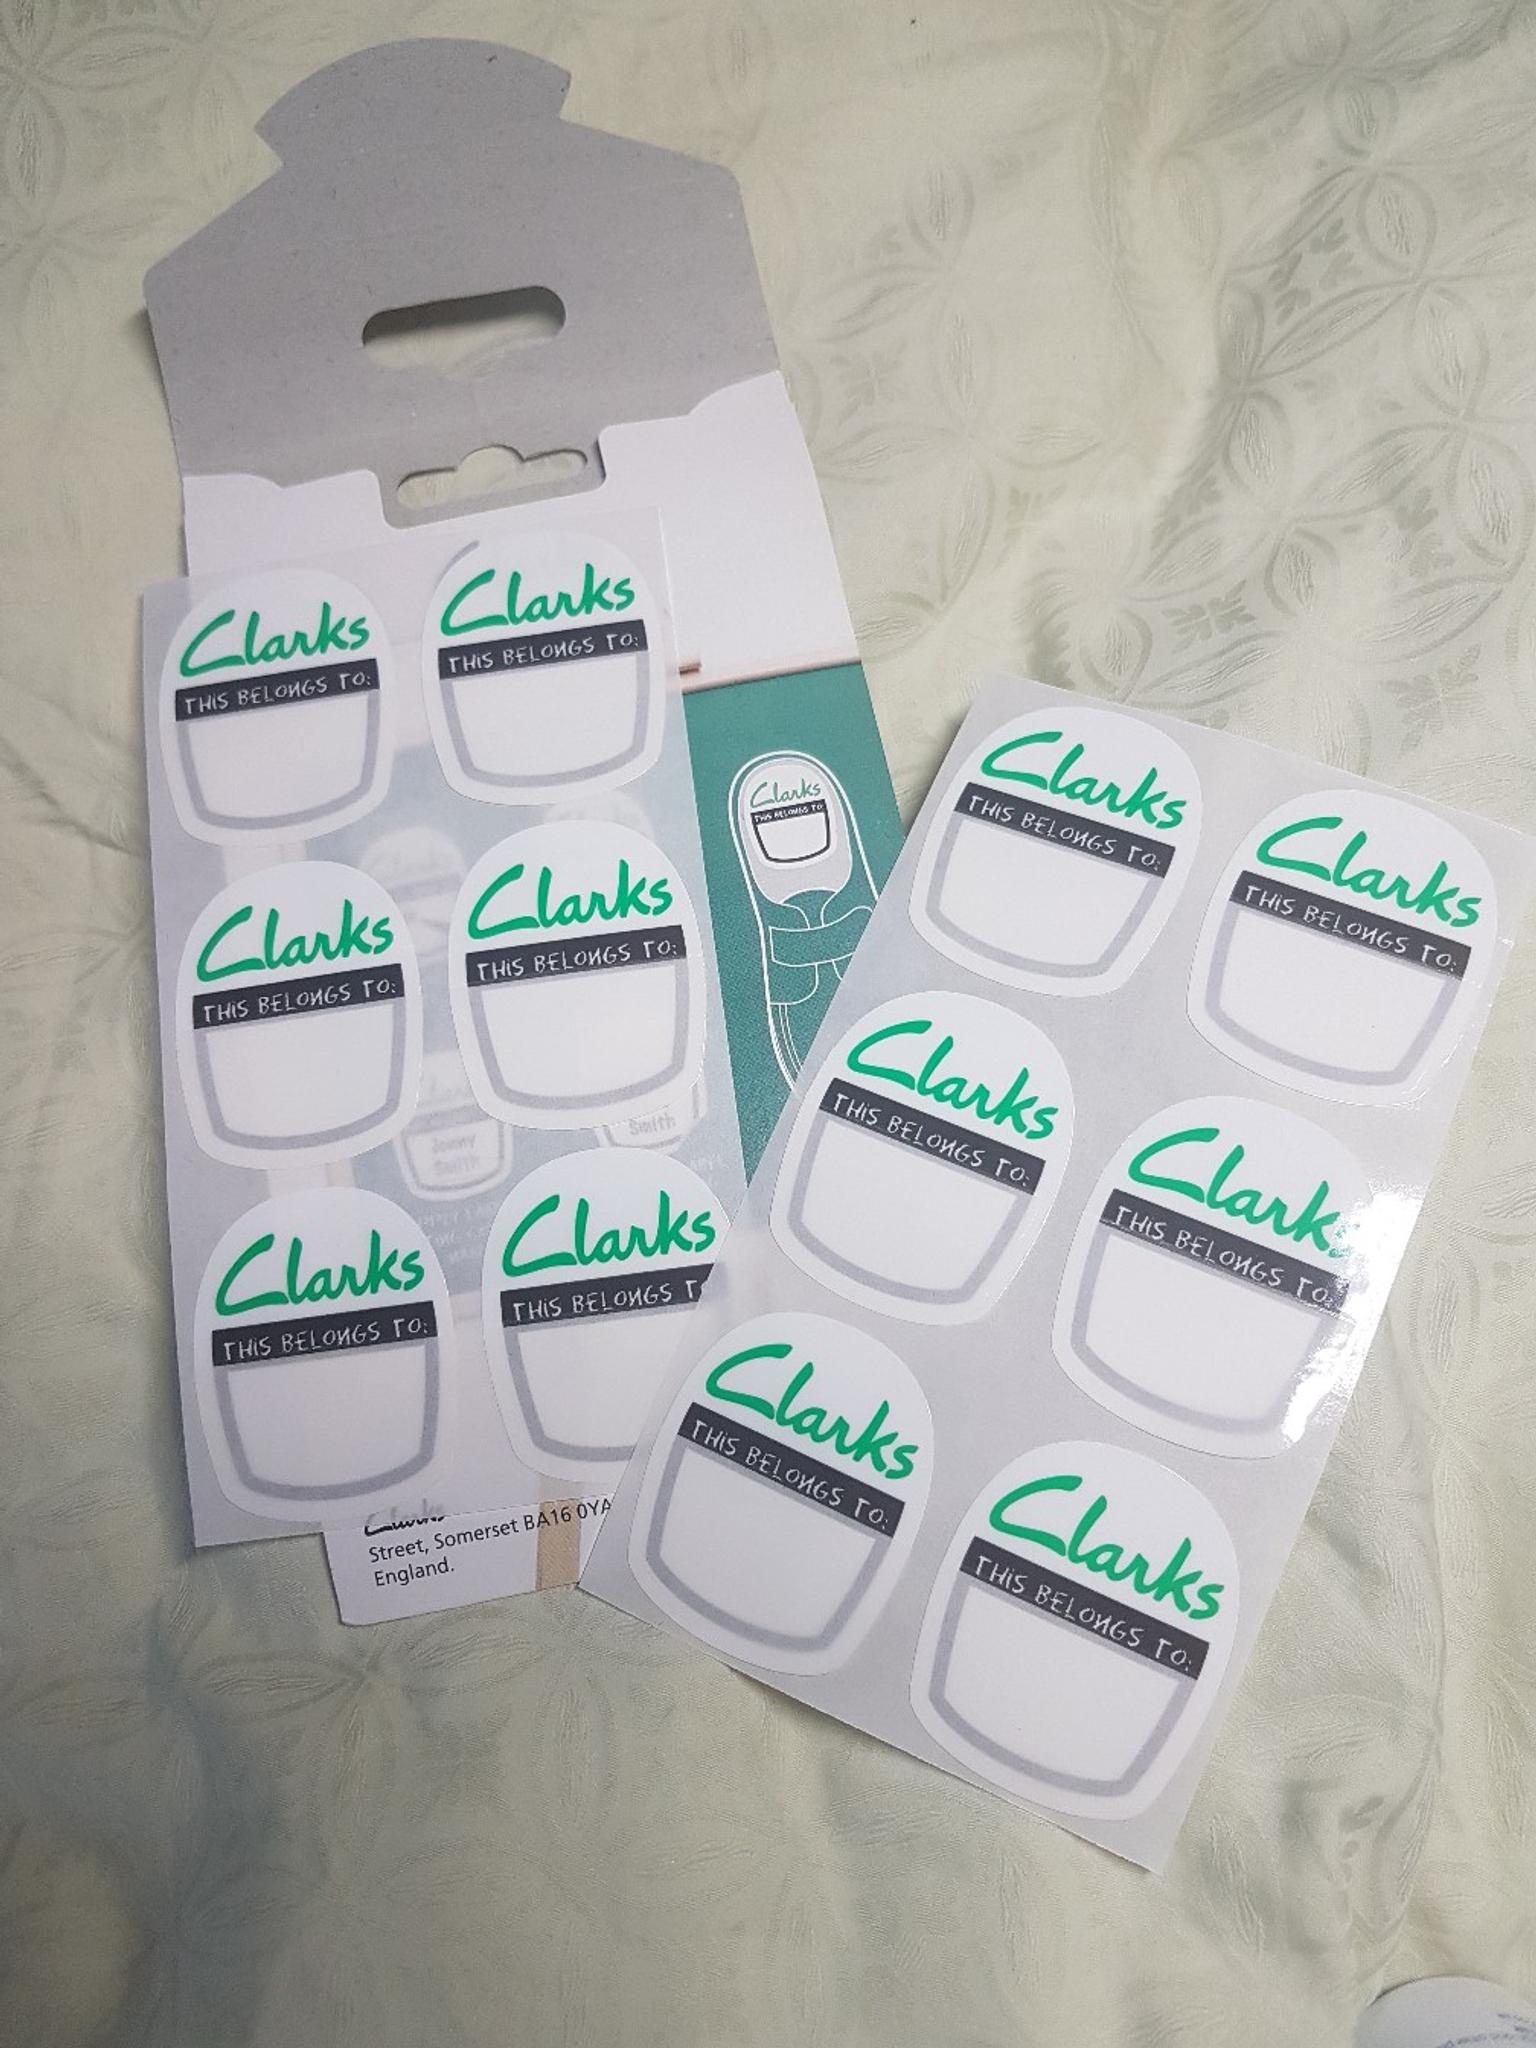 clarks shoe name labels 